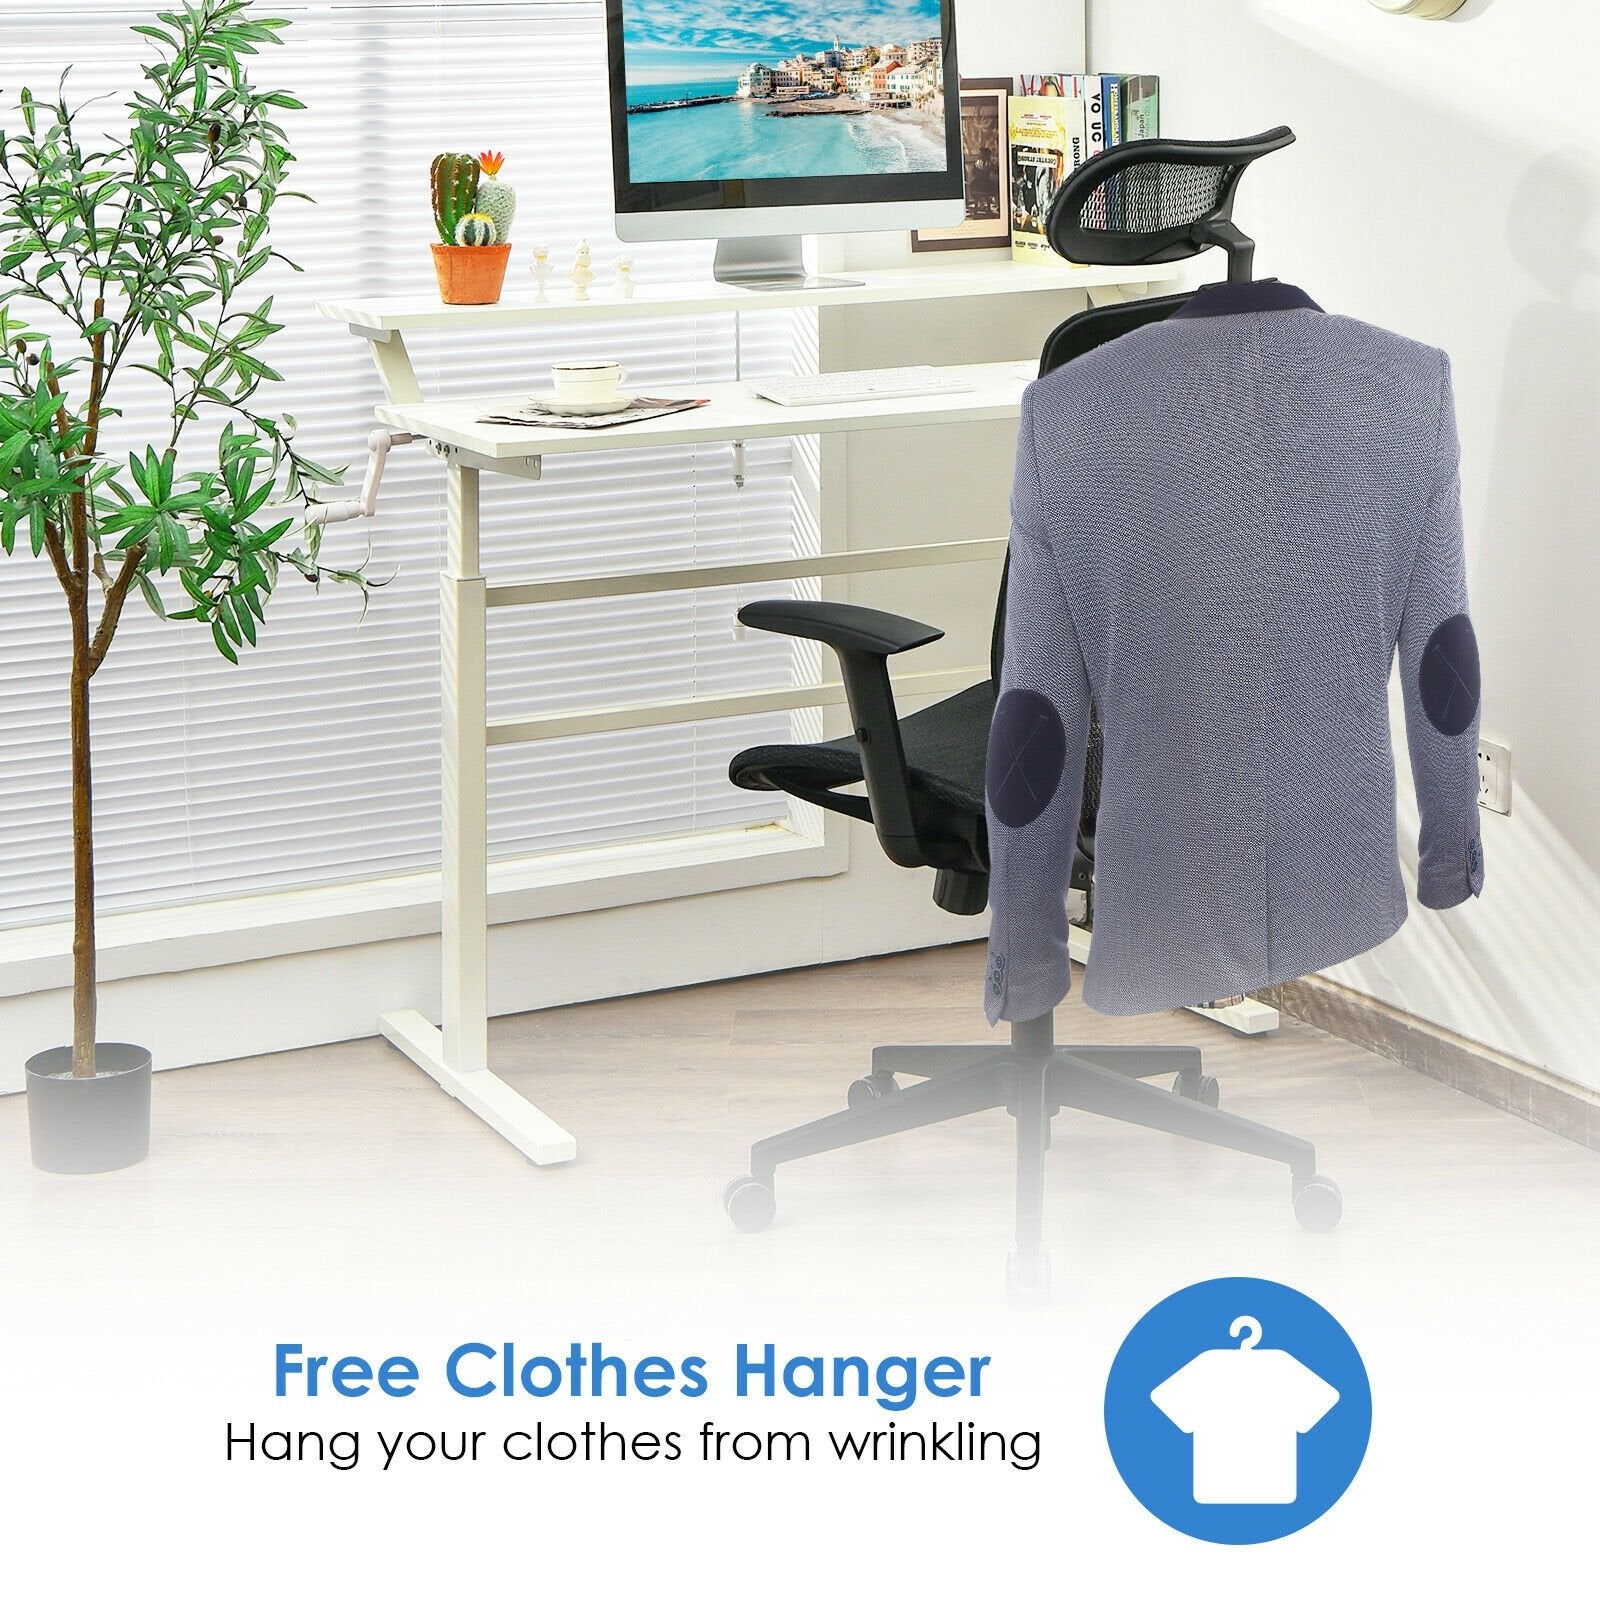 Height Adjustable Ergonomic High Back Mesh Office Chair with Hanger, Black at Gallery Canada